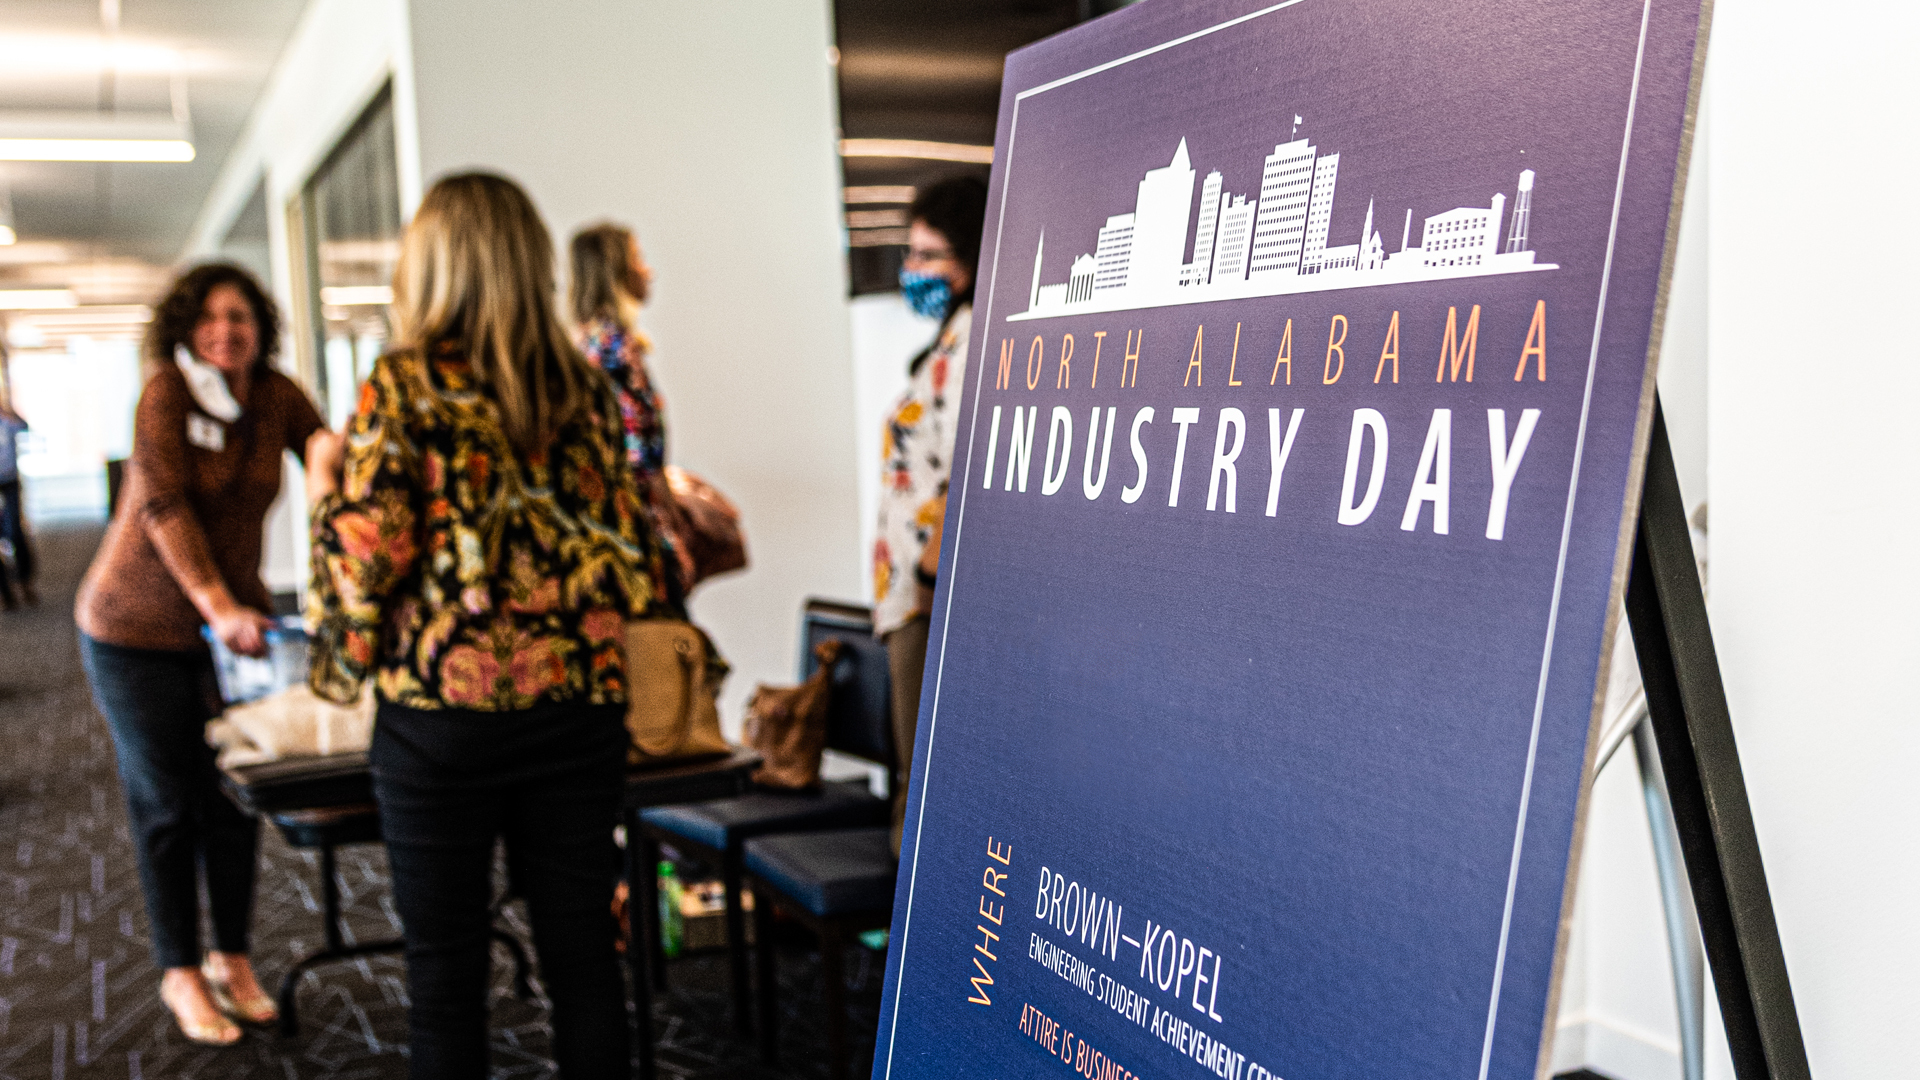 North Alabama Industry Day will be on October 19